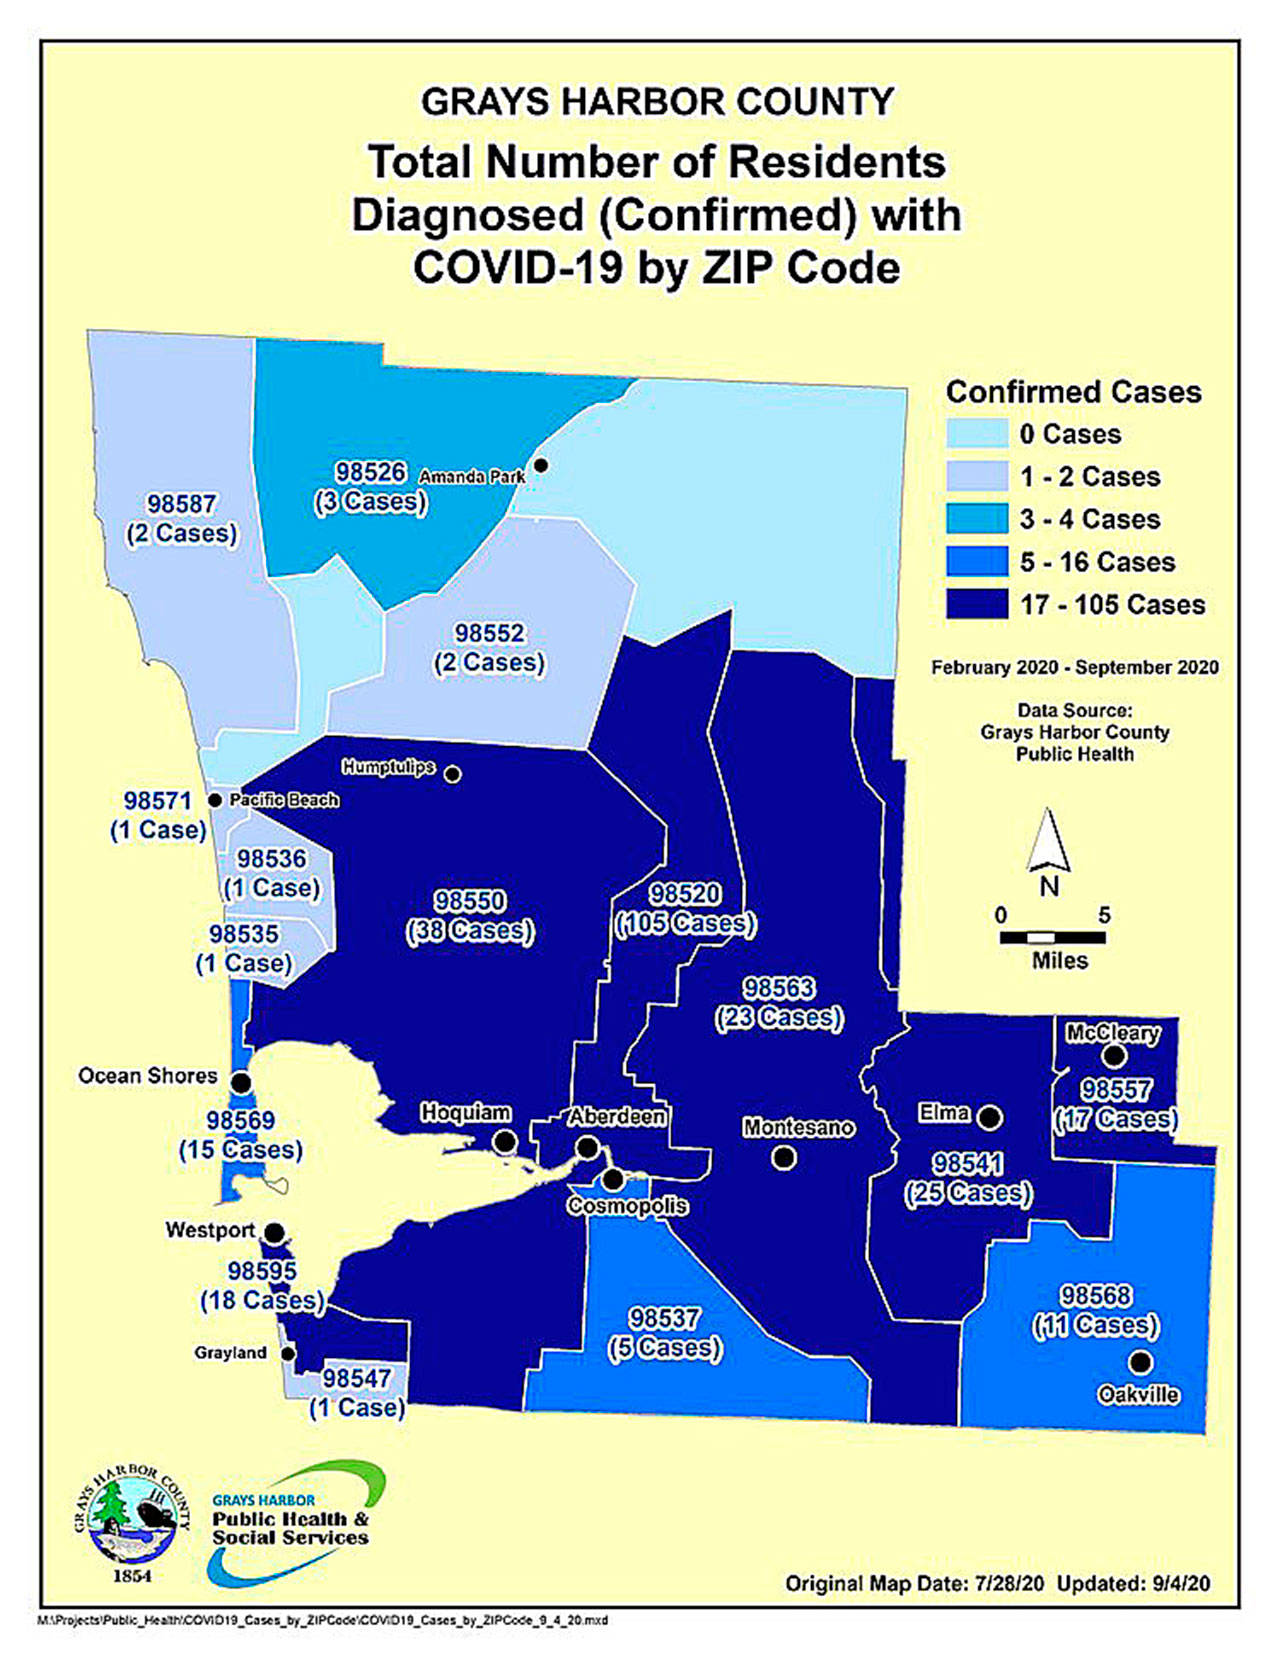 51 new COVID-19 postive tests confirmed in Grays Harbor County since Monday